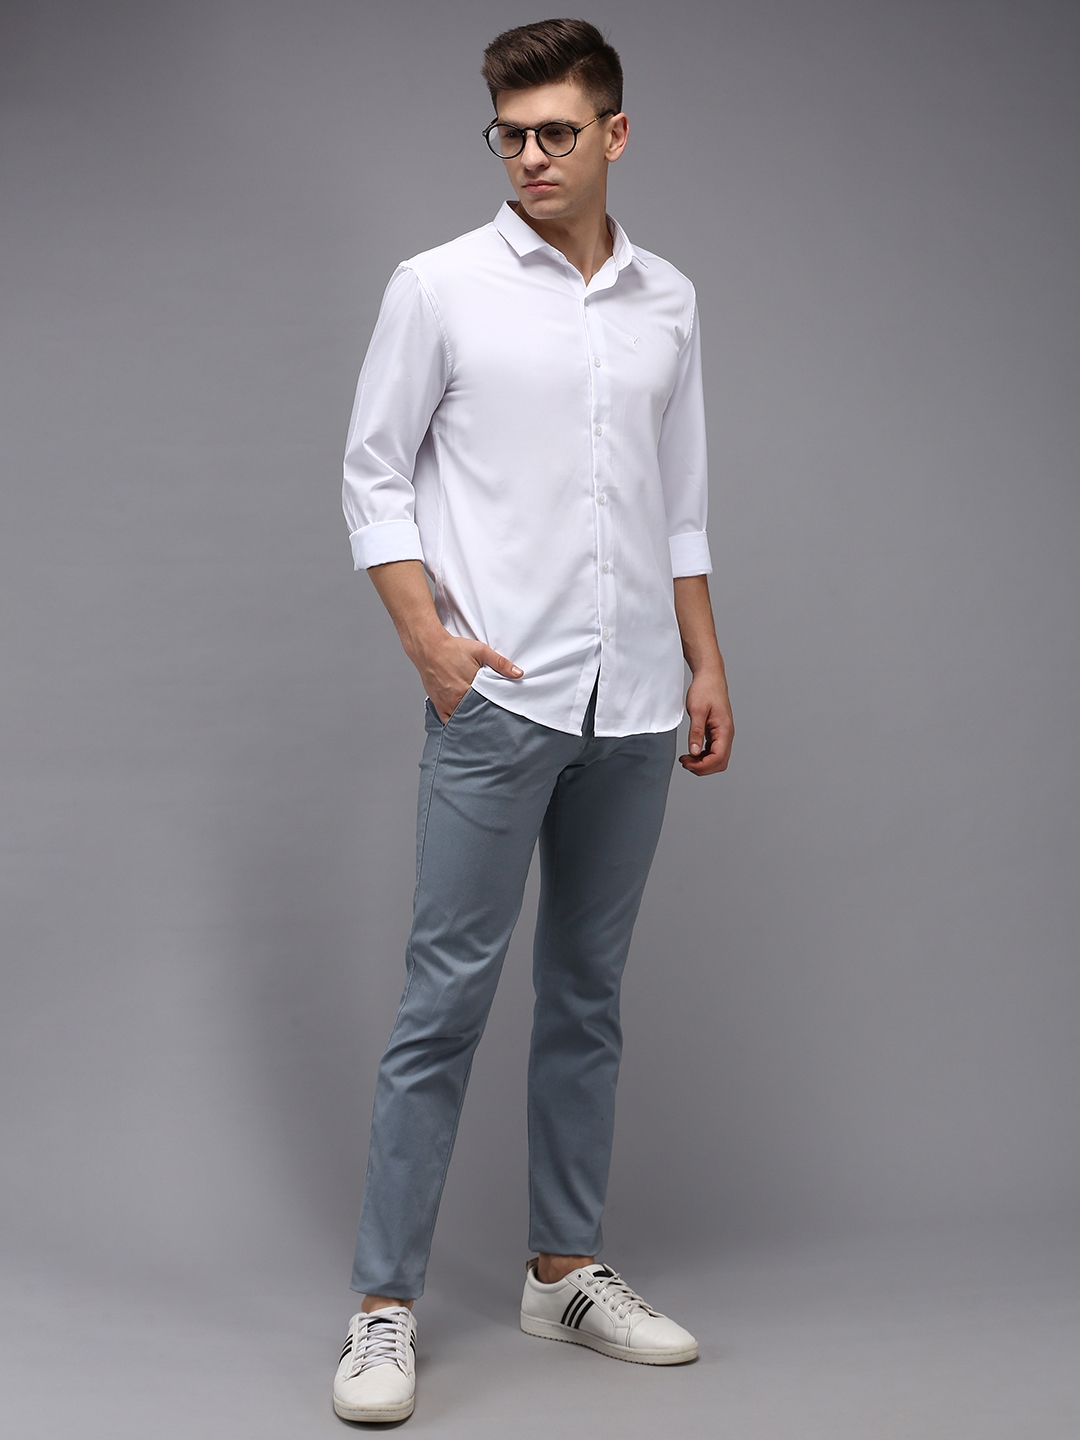 Showoff | SHOWOFF Men White Solid Spread Collar Full Sleeves Casual Shirt 3